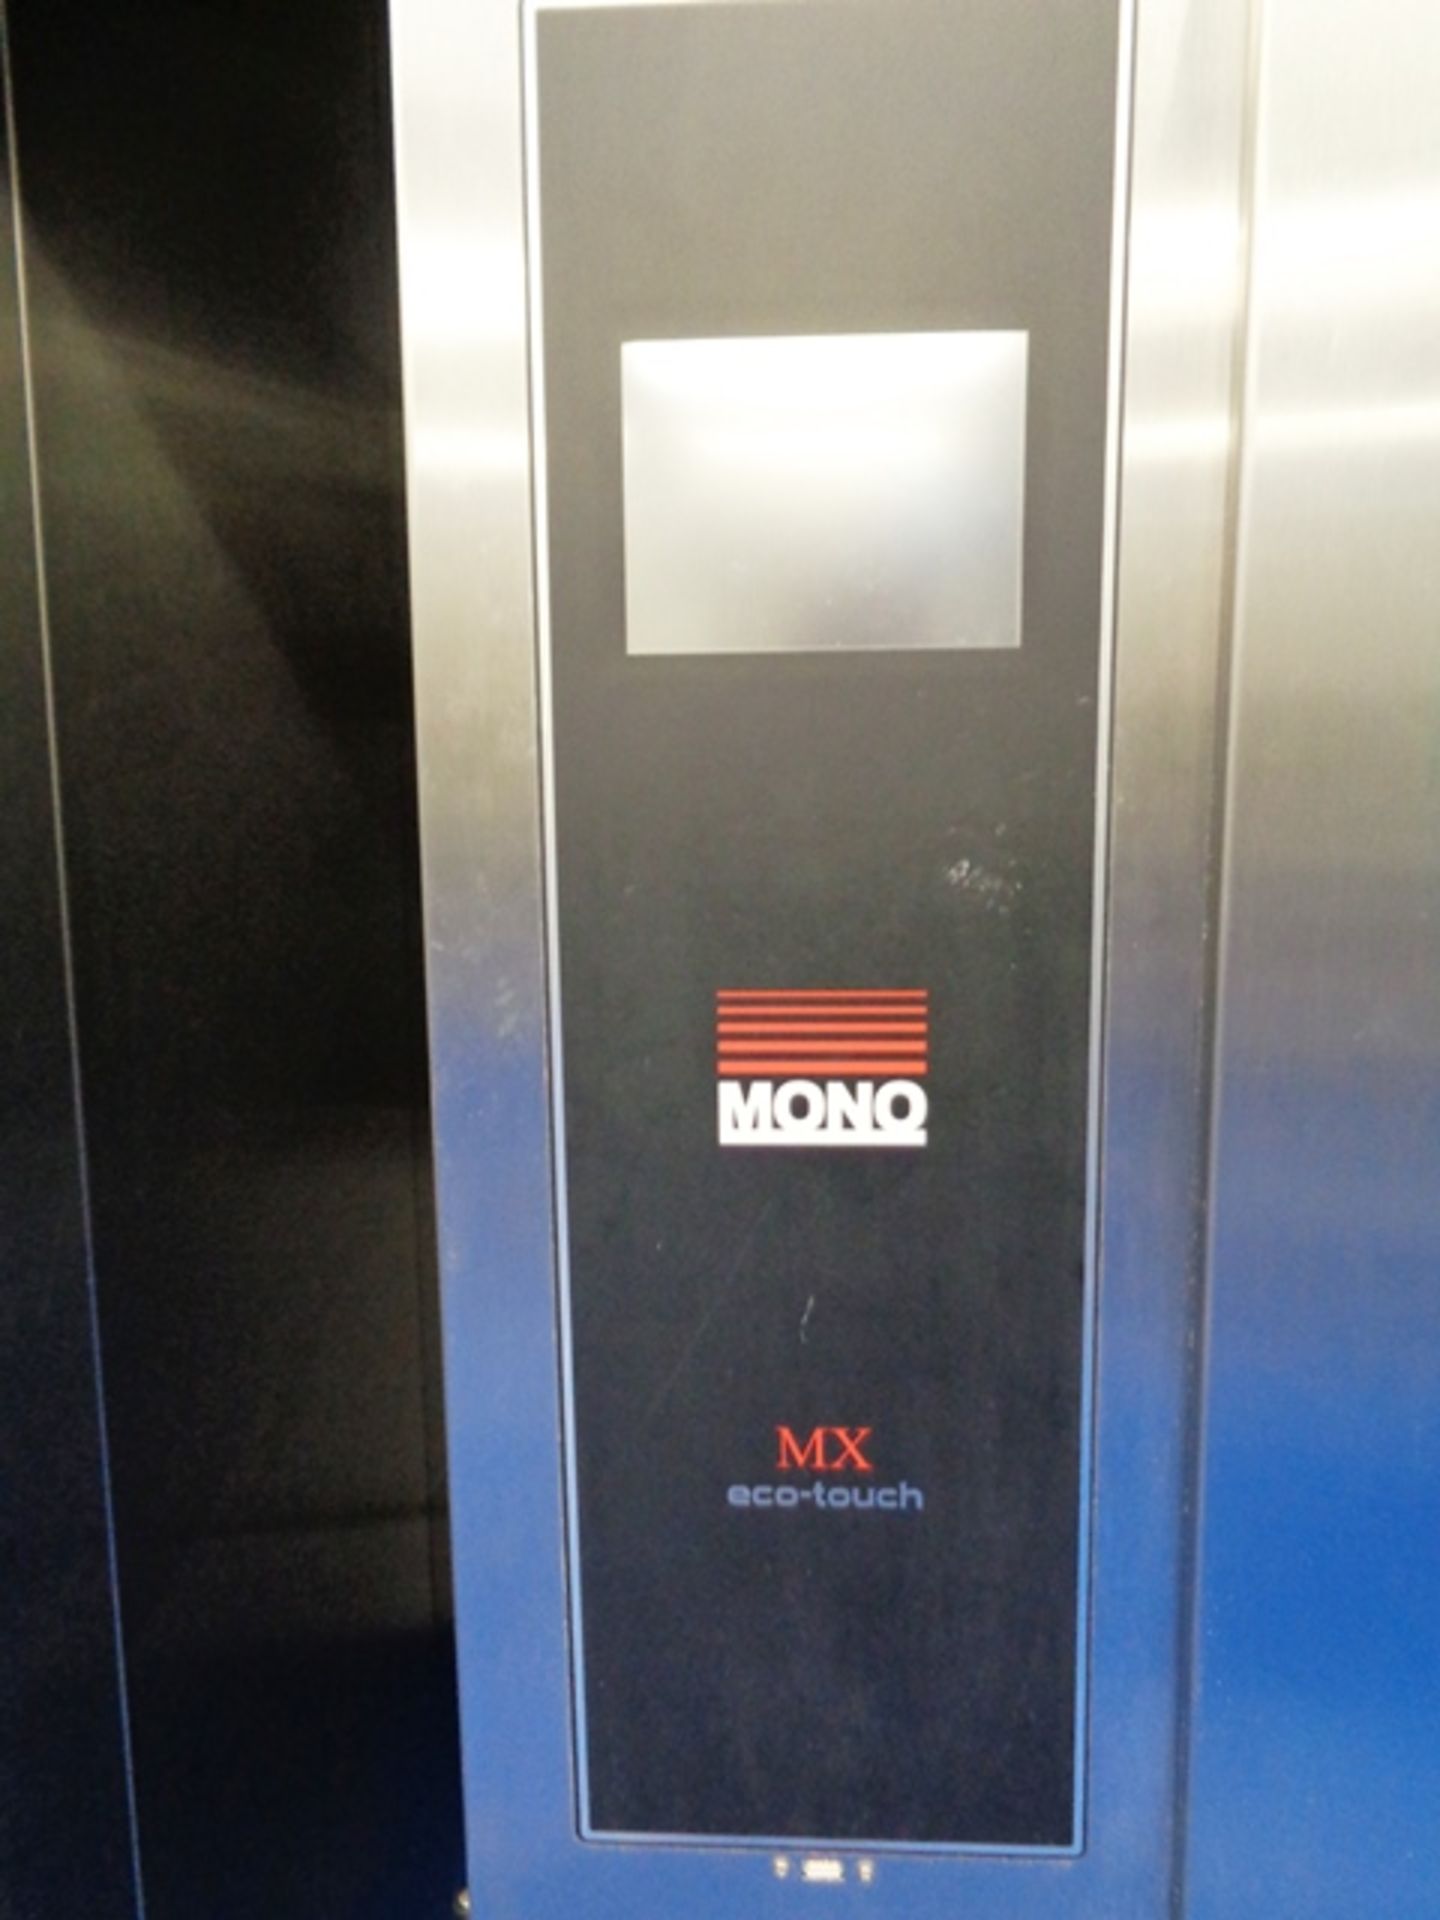 Mono MX Eco-touch electric rack oven, stainless steel, single door, with digital touch screen - Image 2 of 6